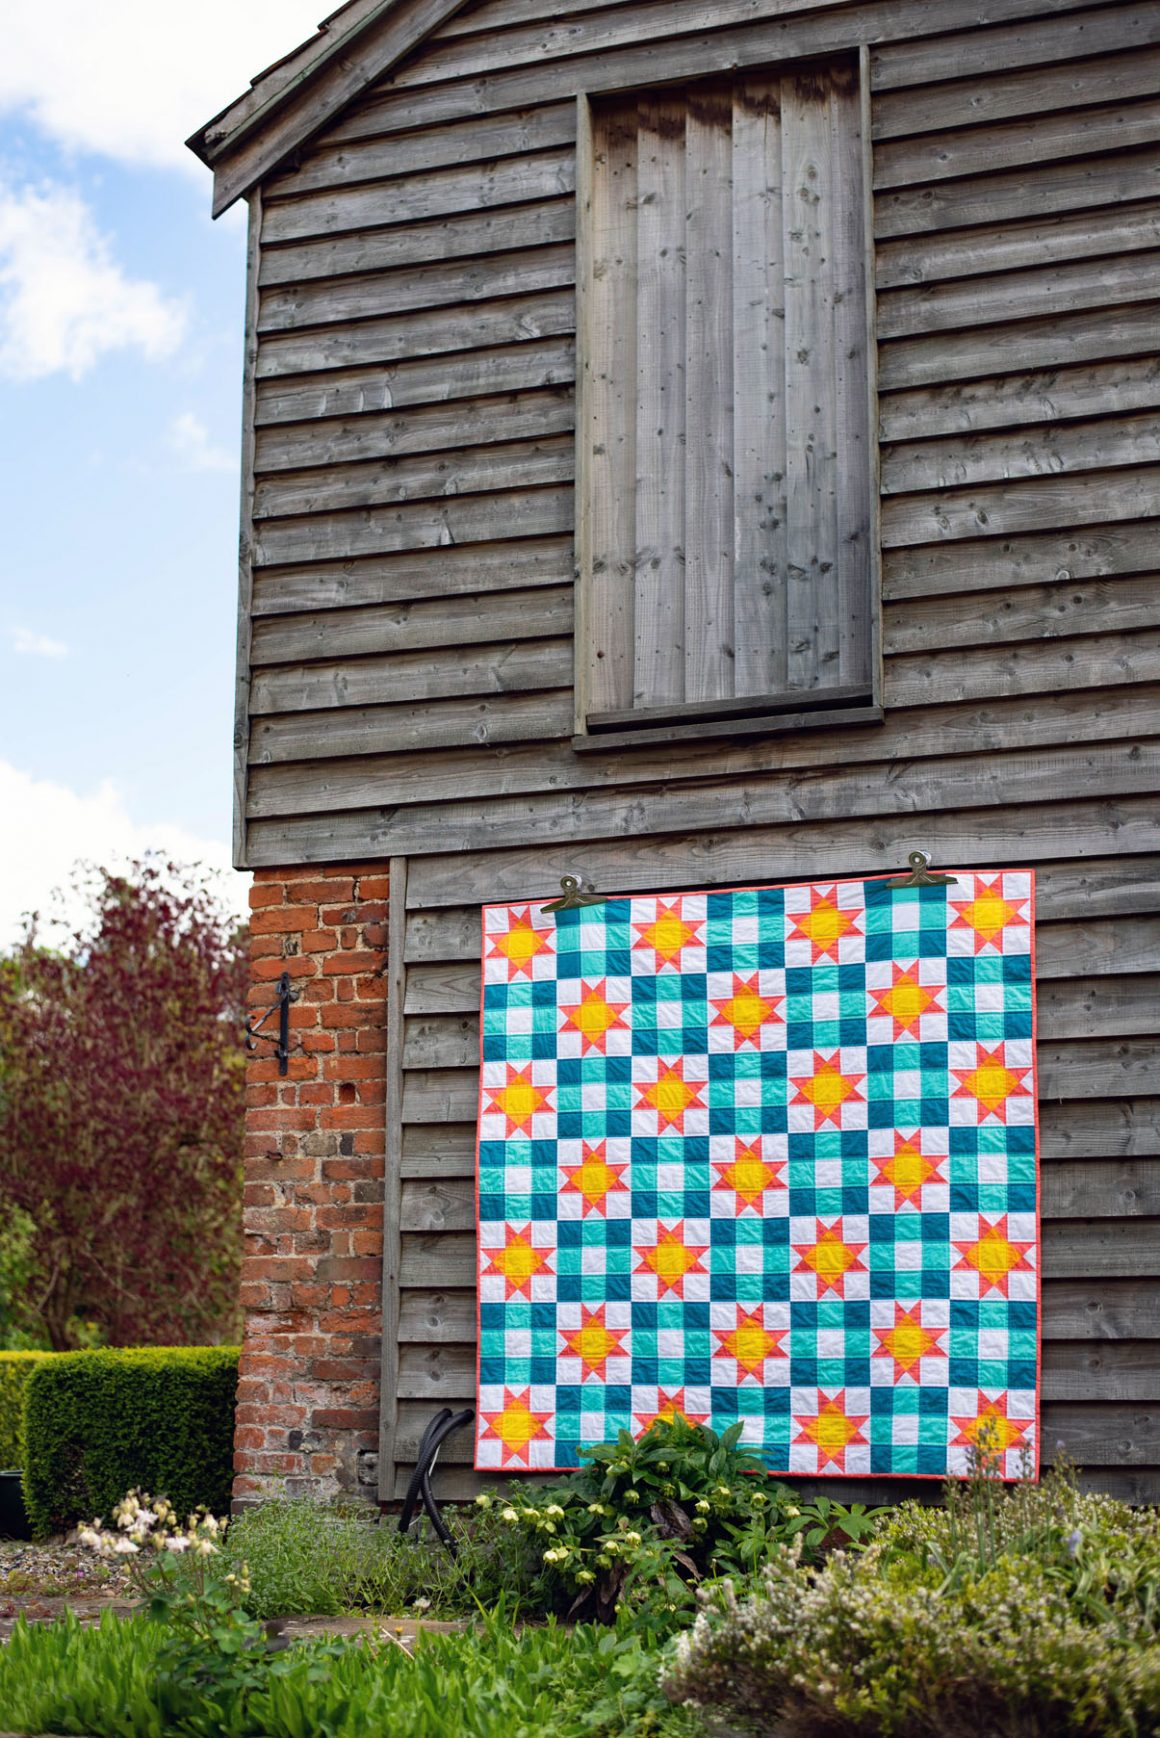 Boot Room Quilt - Free Pattern Tutorial - A modern spin on traditional quilt blocks!